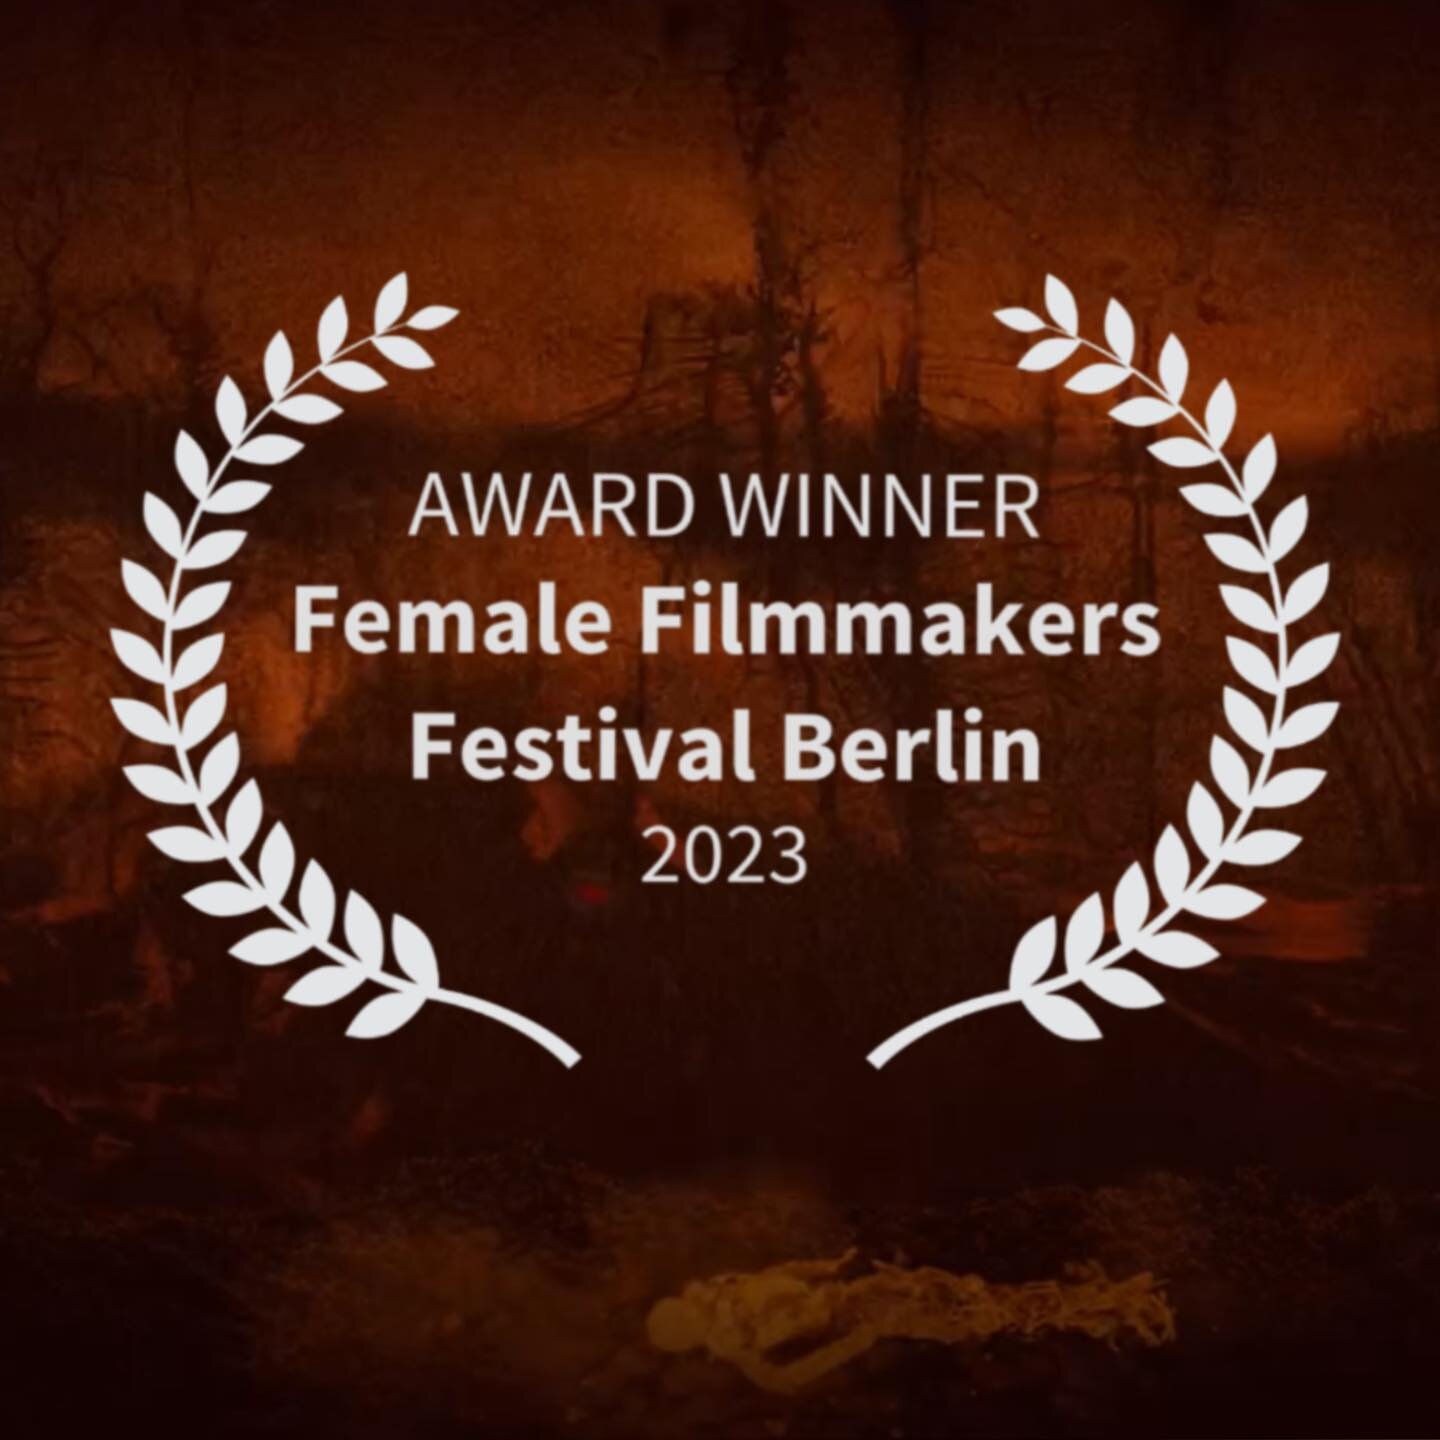 My heart is in Berlin. So honored to win Best Animation 🙌🏻